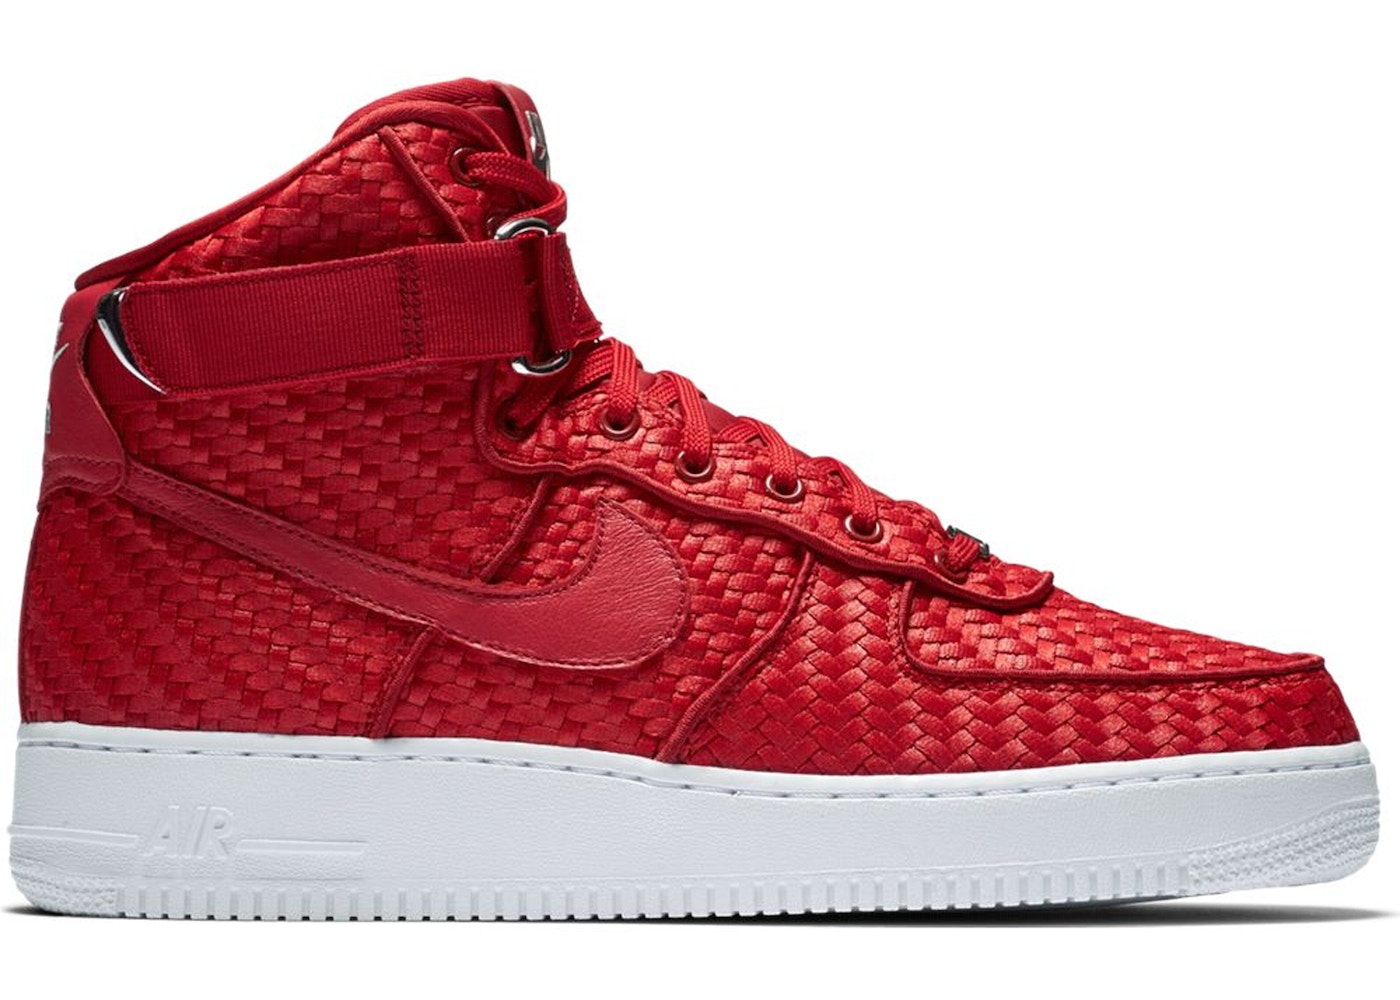 Nike Air Force 1 High Woven Gym Red - 843870-600